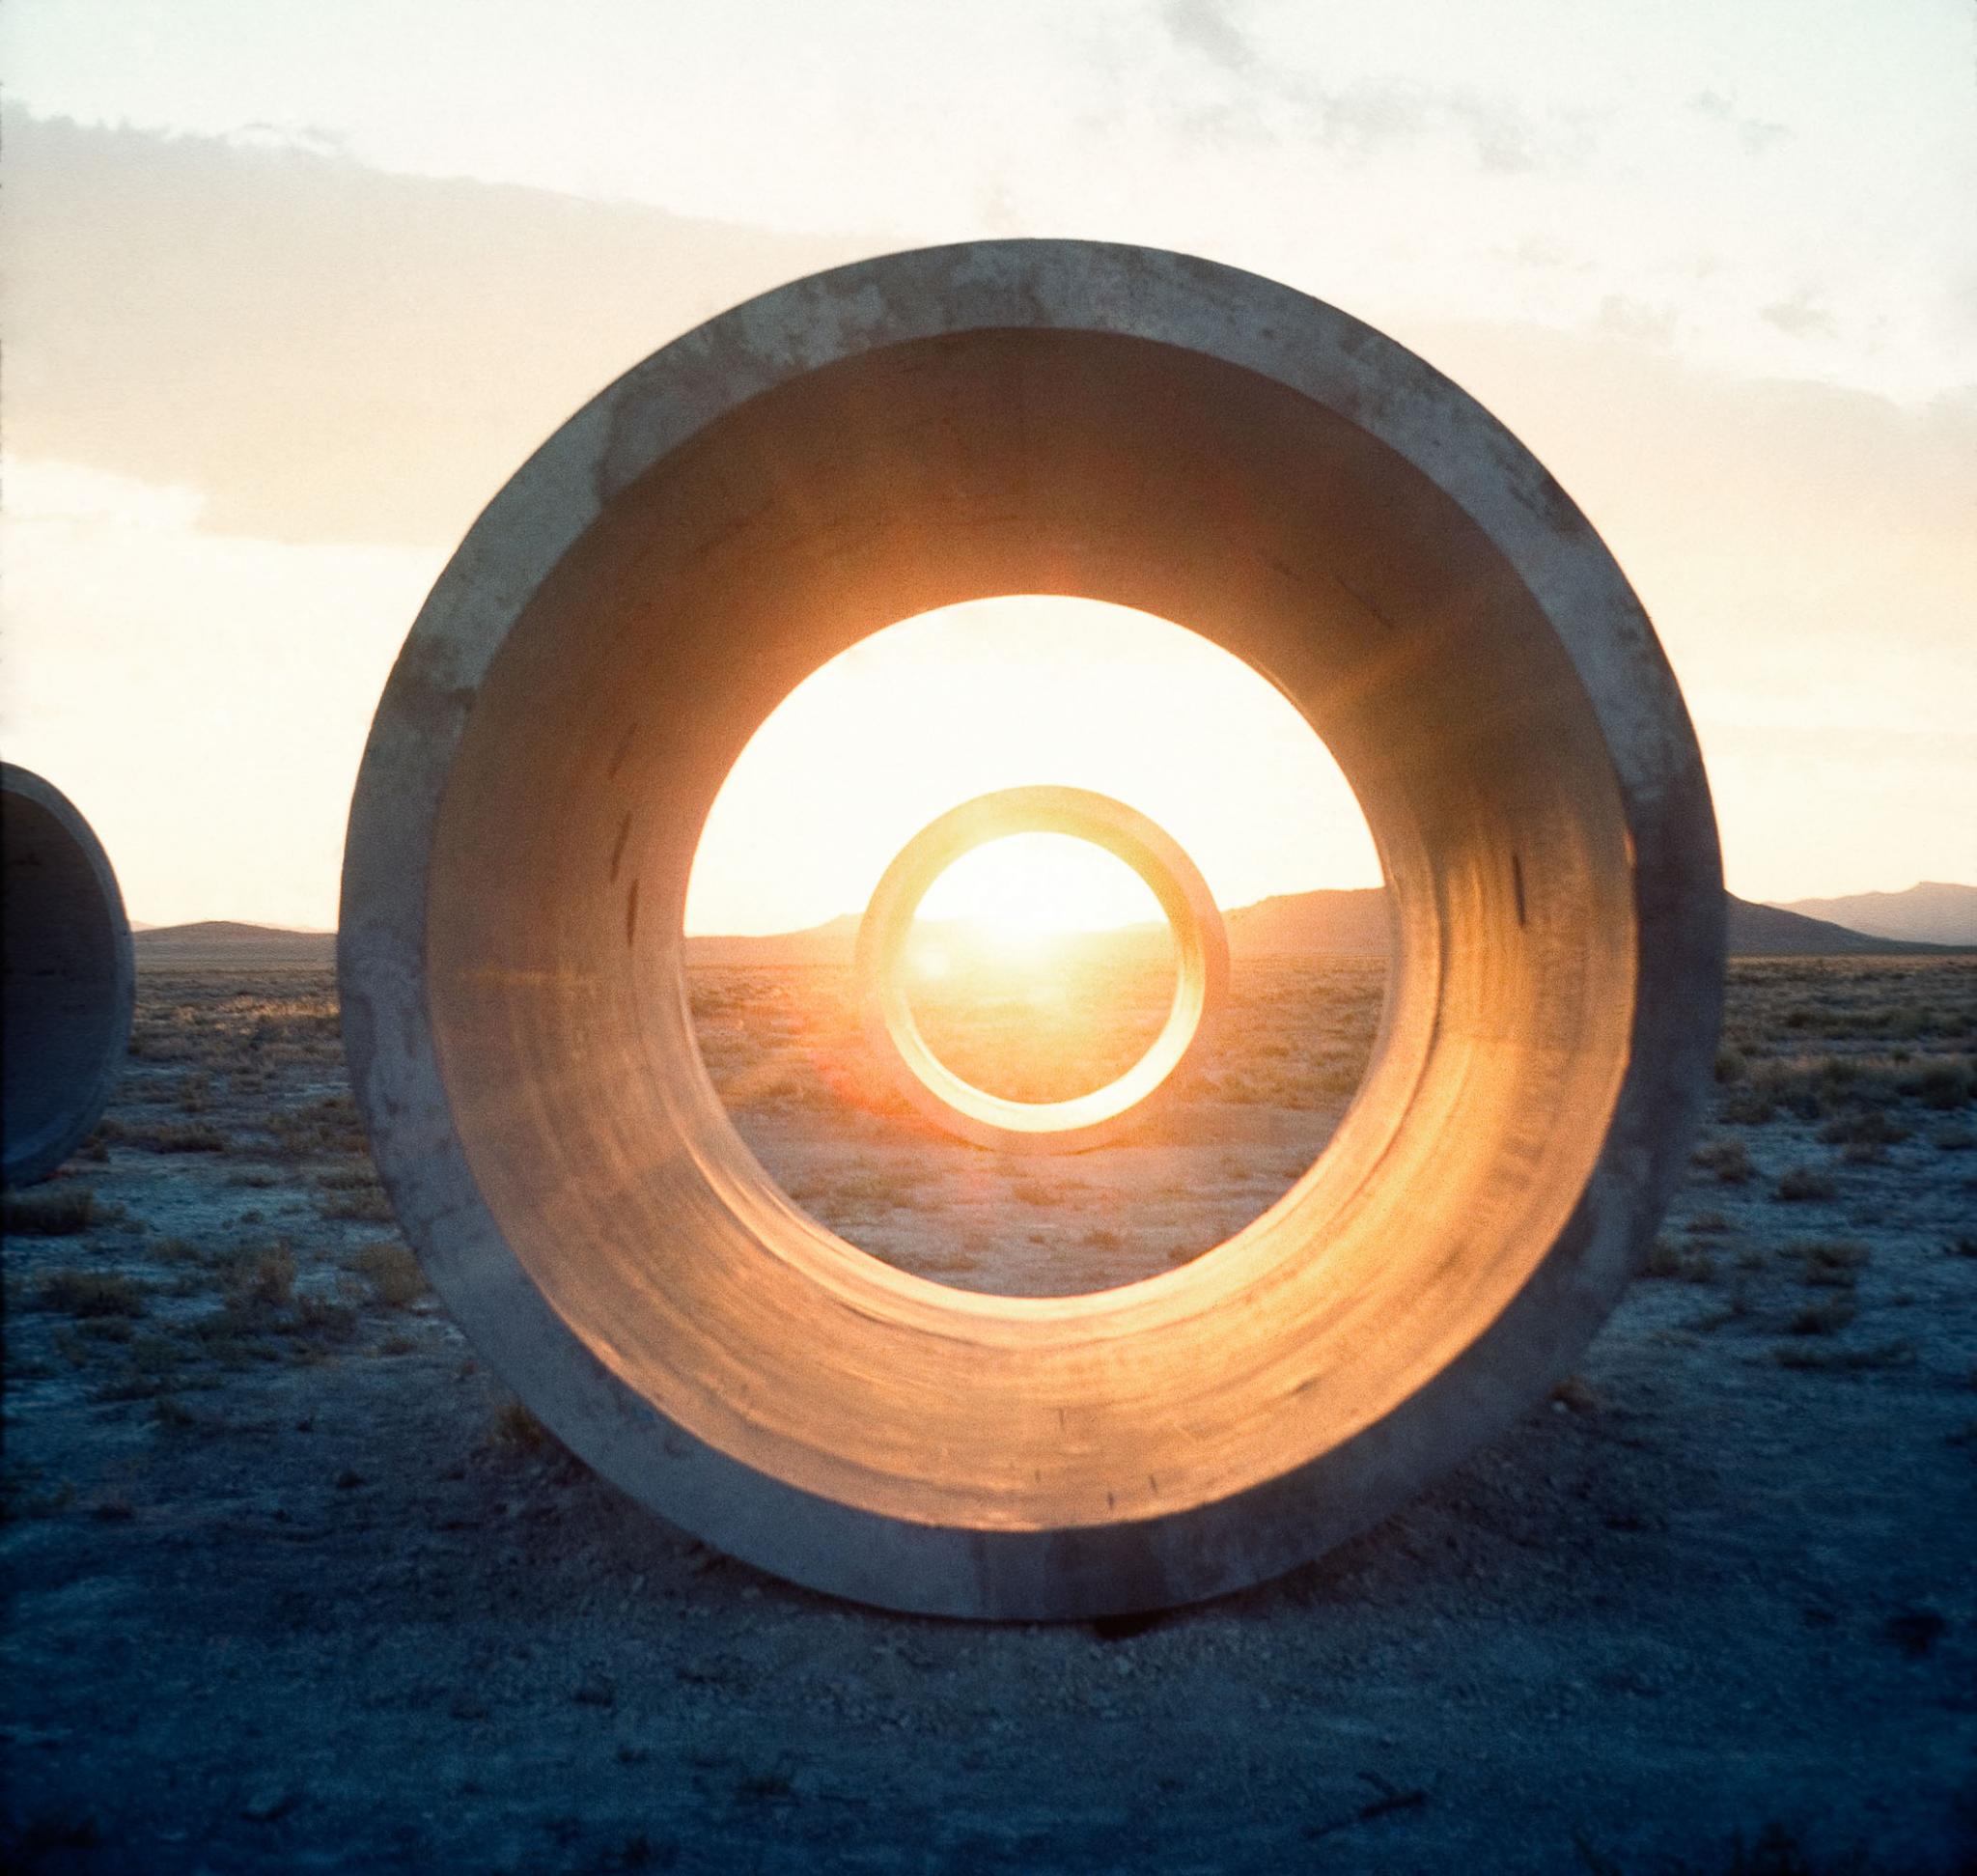 Sun Tunnels viewed at sunrise on the summer solstice.